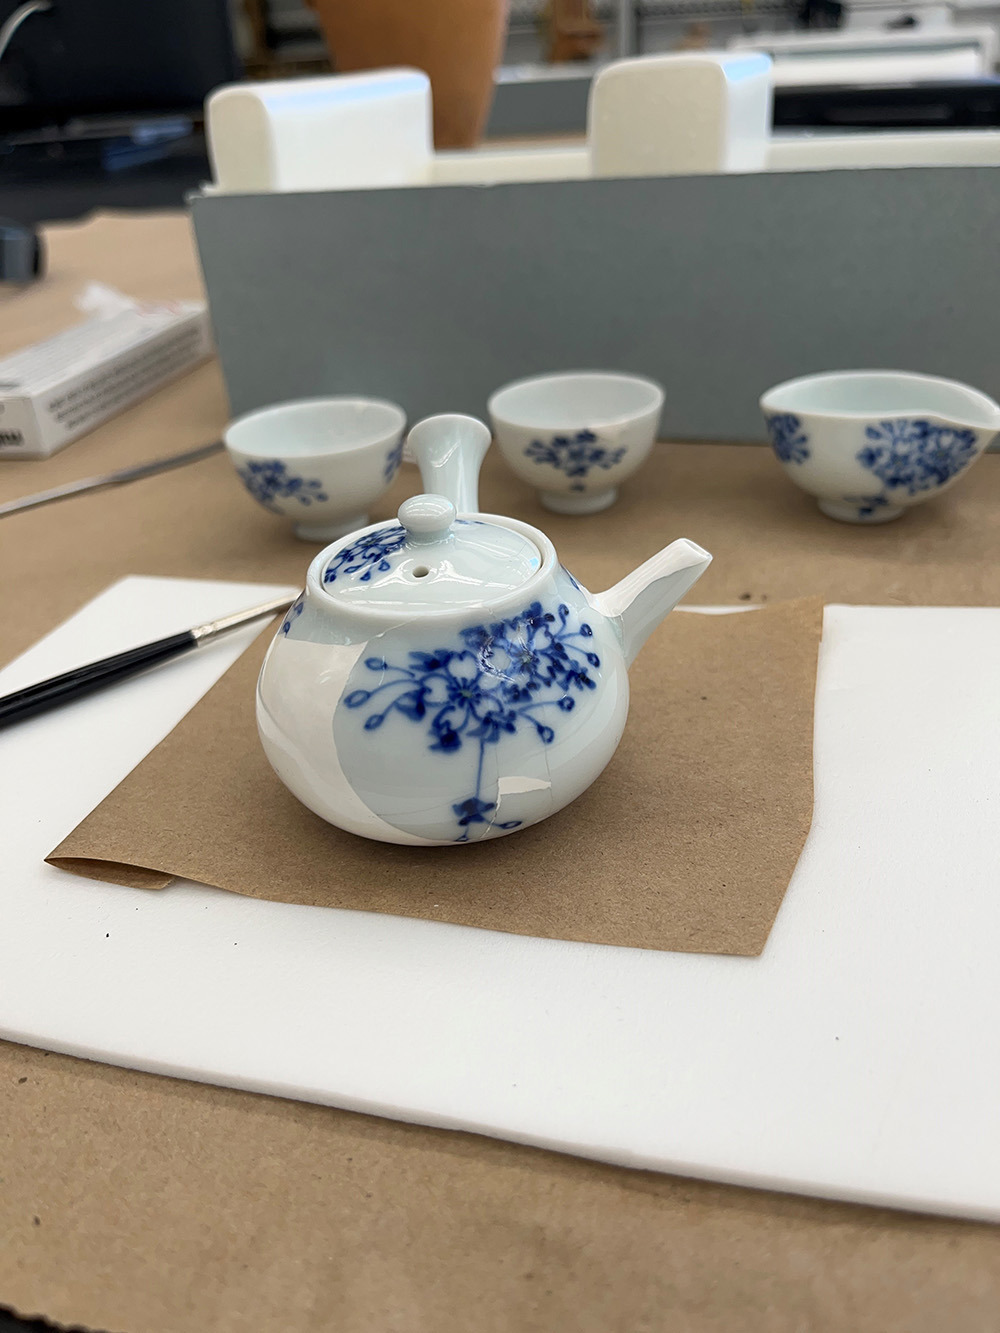 A small white teapot with blue floral decorations